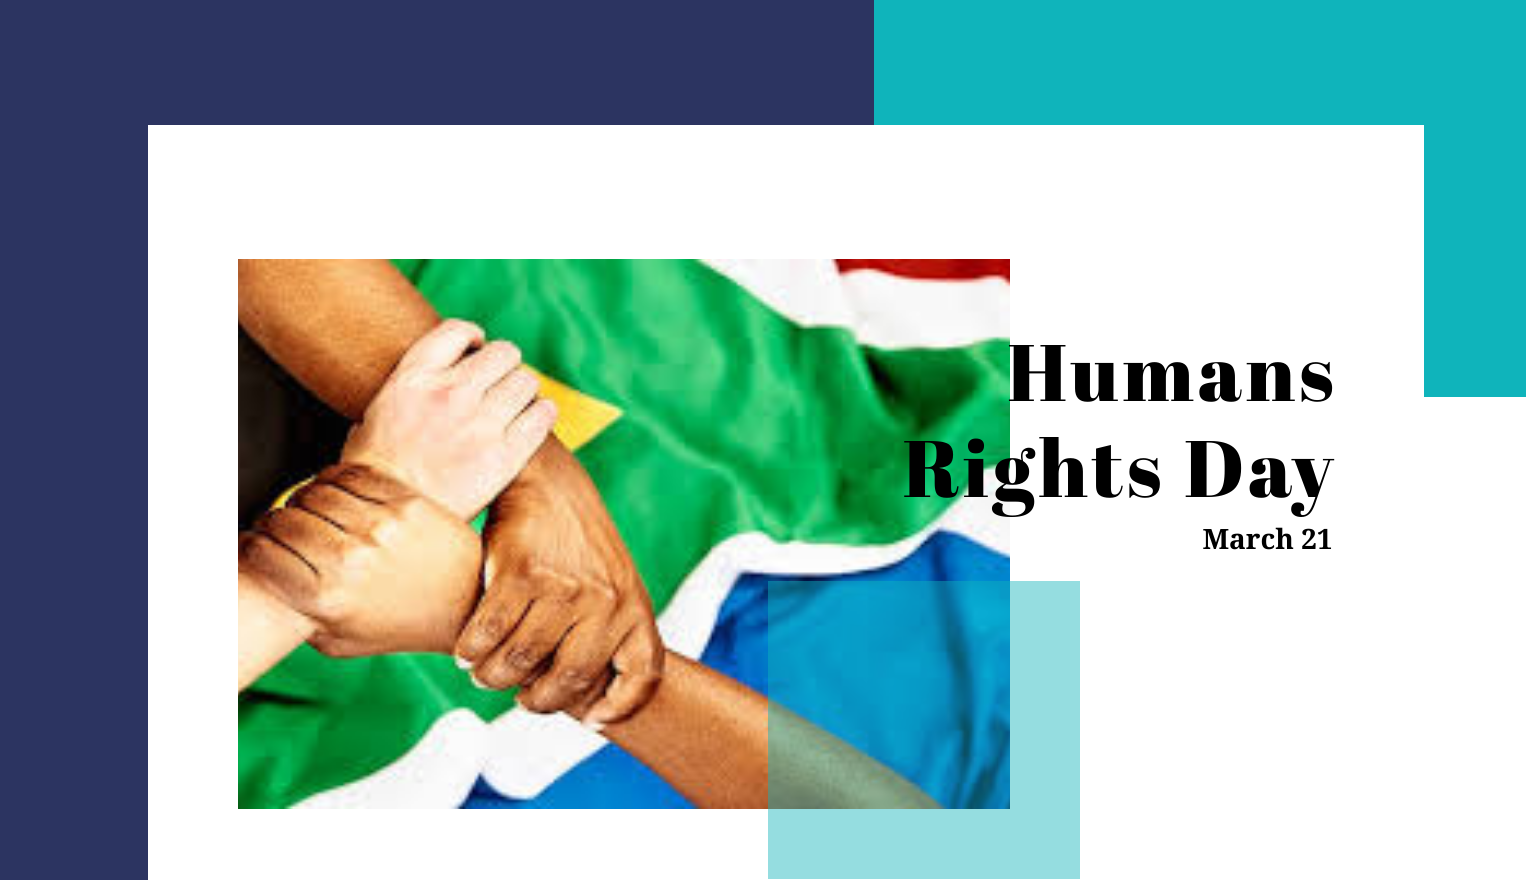 https://www.sihma.org.za/photos/shares/Human Rights Day Infographic.png